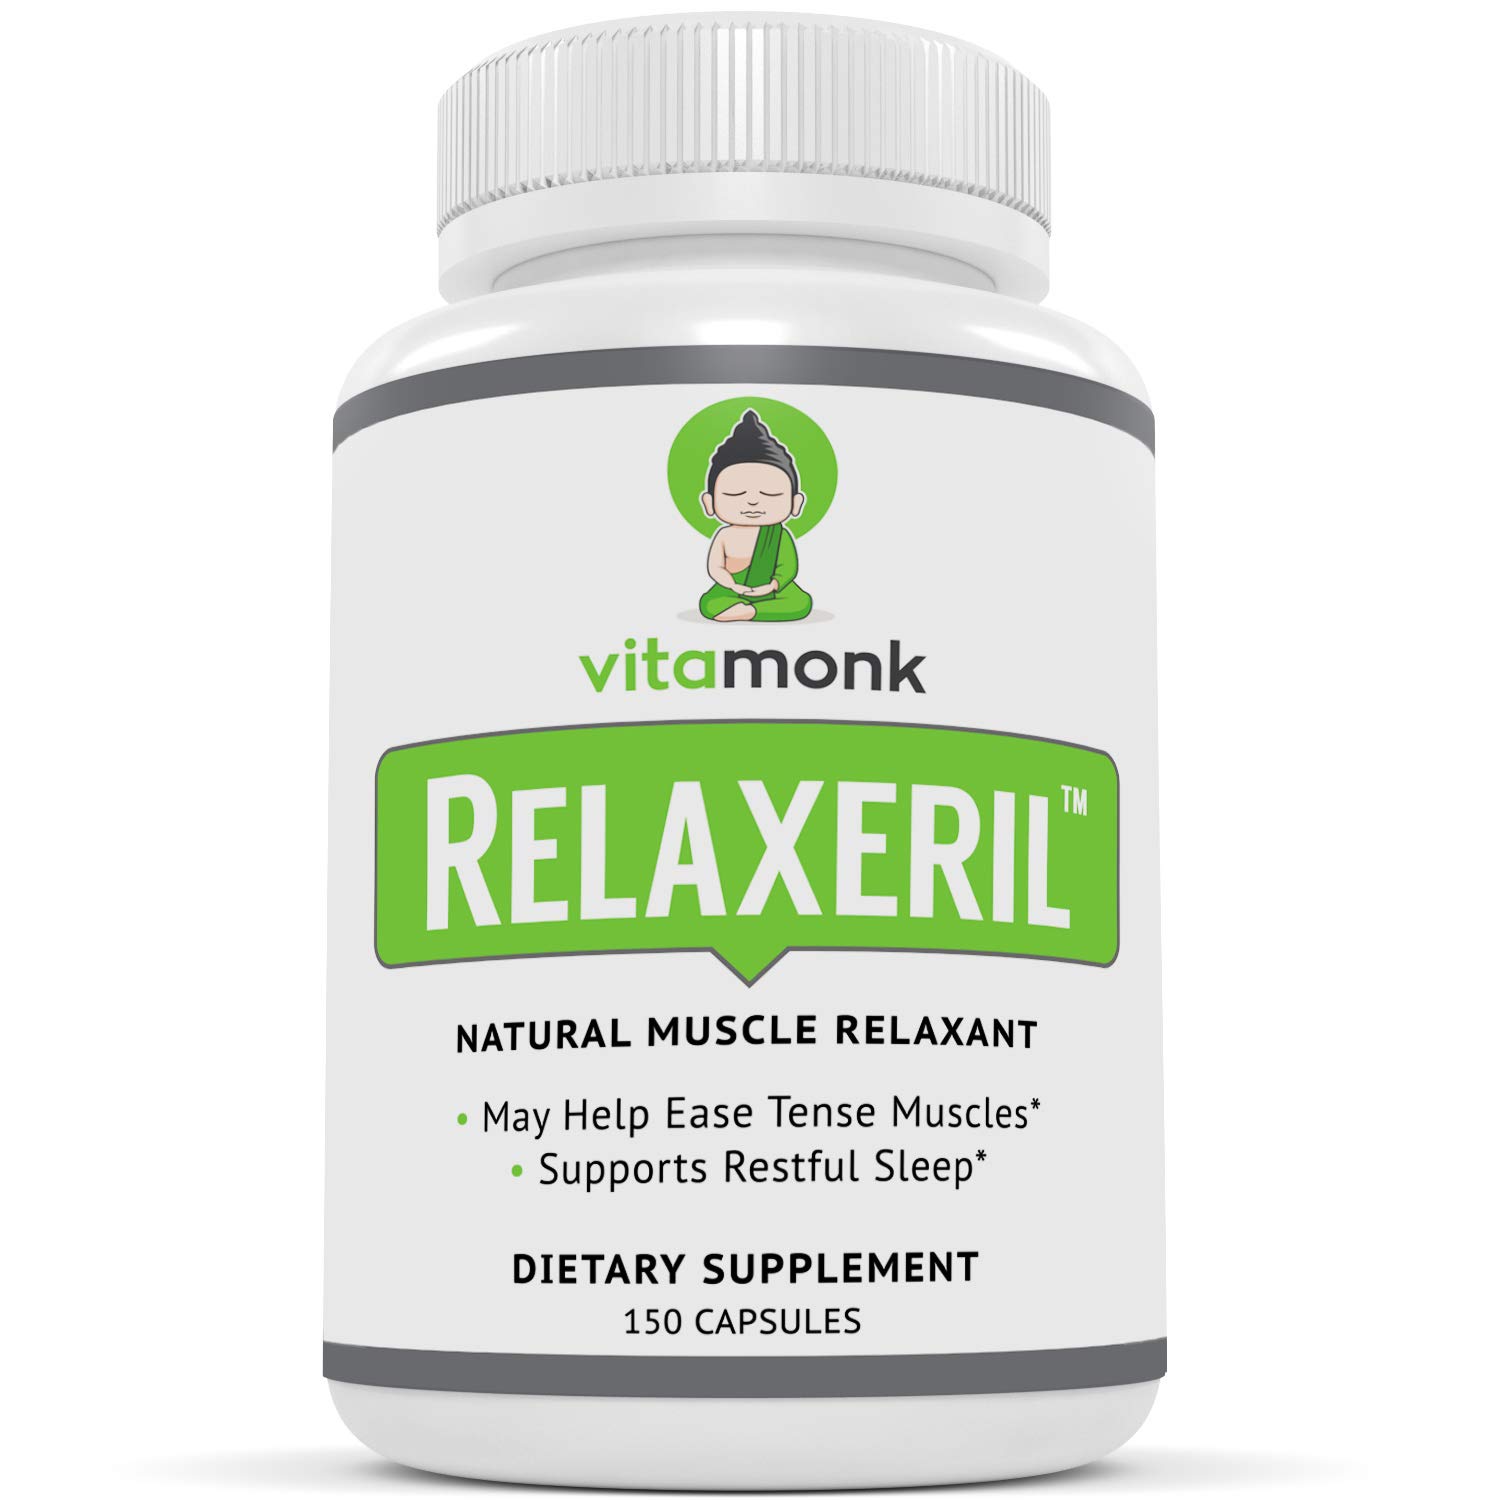 What is the best muscle relaxer?